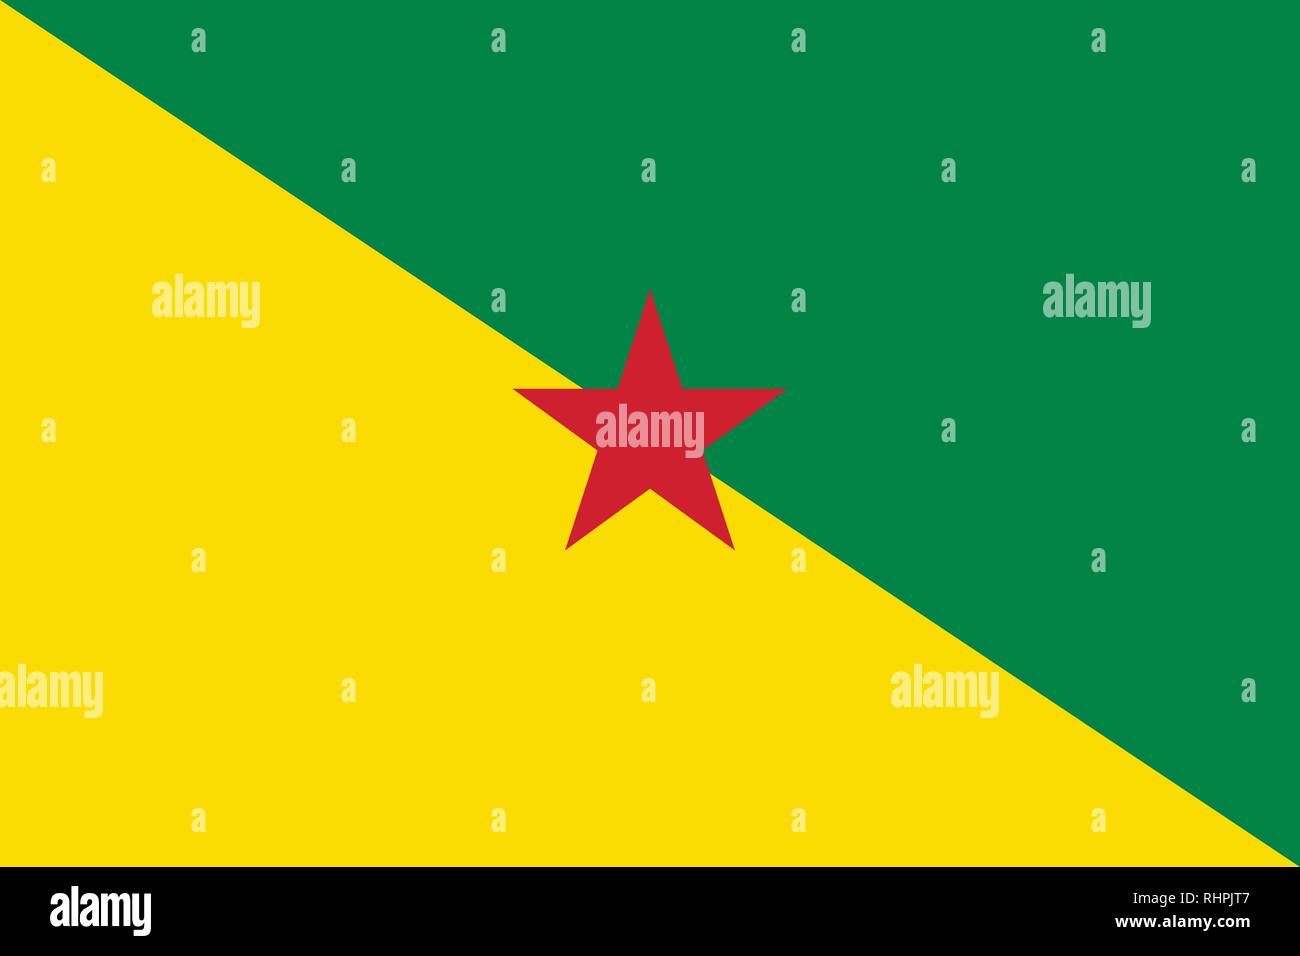 Vector Image of French Guiana Flag. Based on the official and exact French Guiana flag dimensions (3:2) & colors (348C, Yellow C and 186C) Stock Vector